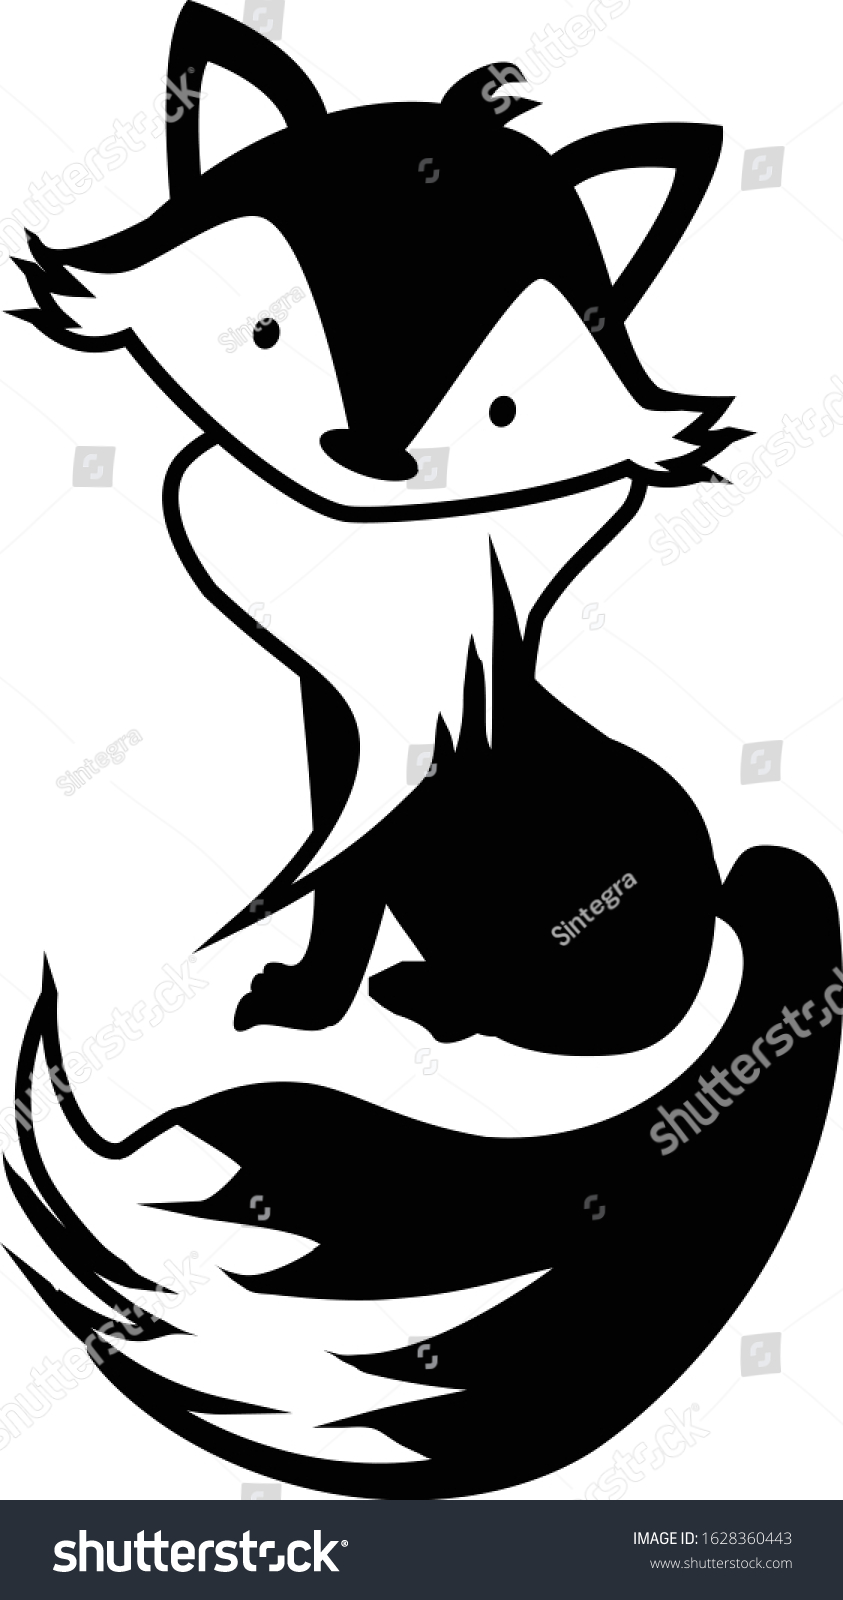 SVG of Cute, sweet and adorable fox perfect for card invitations, calendars, wall art, clothes, birthdays, nursery, baby shower, children, party, clothes, printing, crafts, cutting machine and so one svg